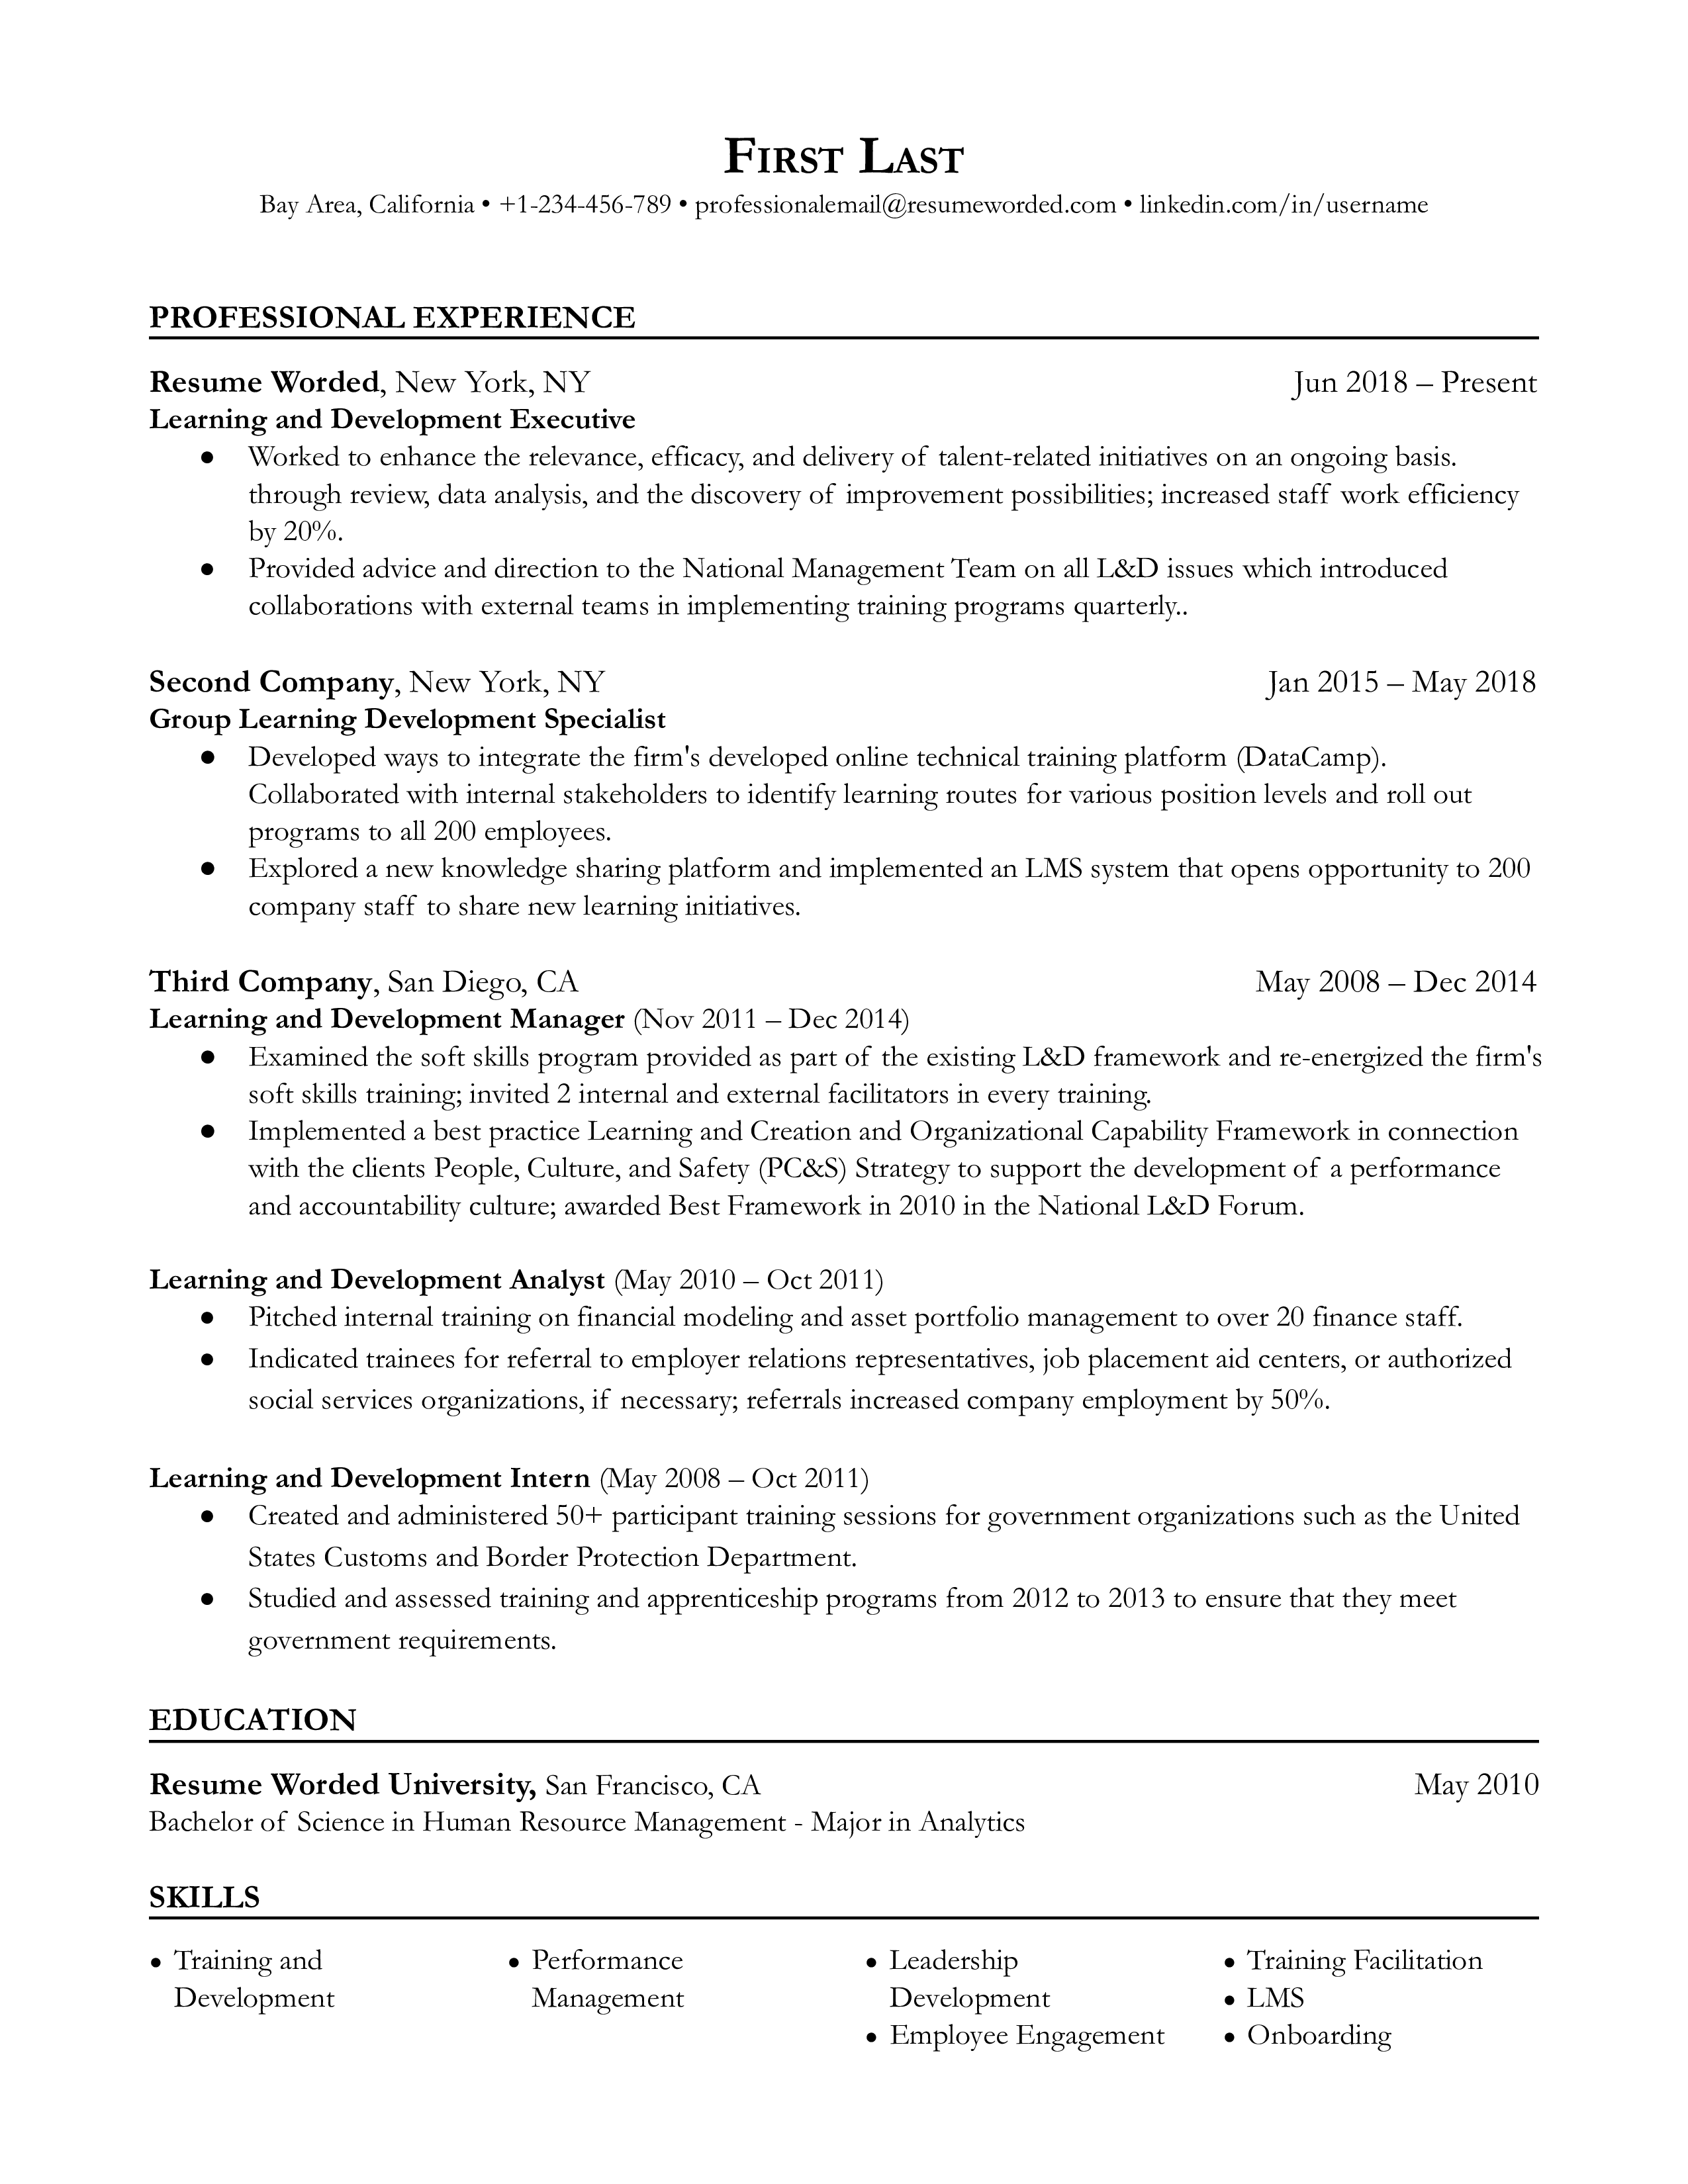 Detail-filled CV of a Learning and Development Executive showcasing their skill set and prior experiences.